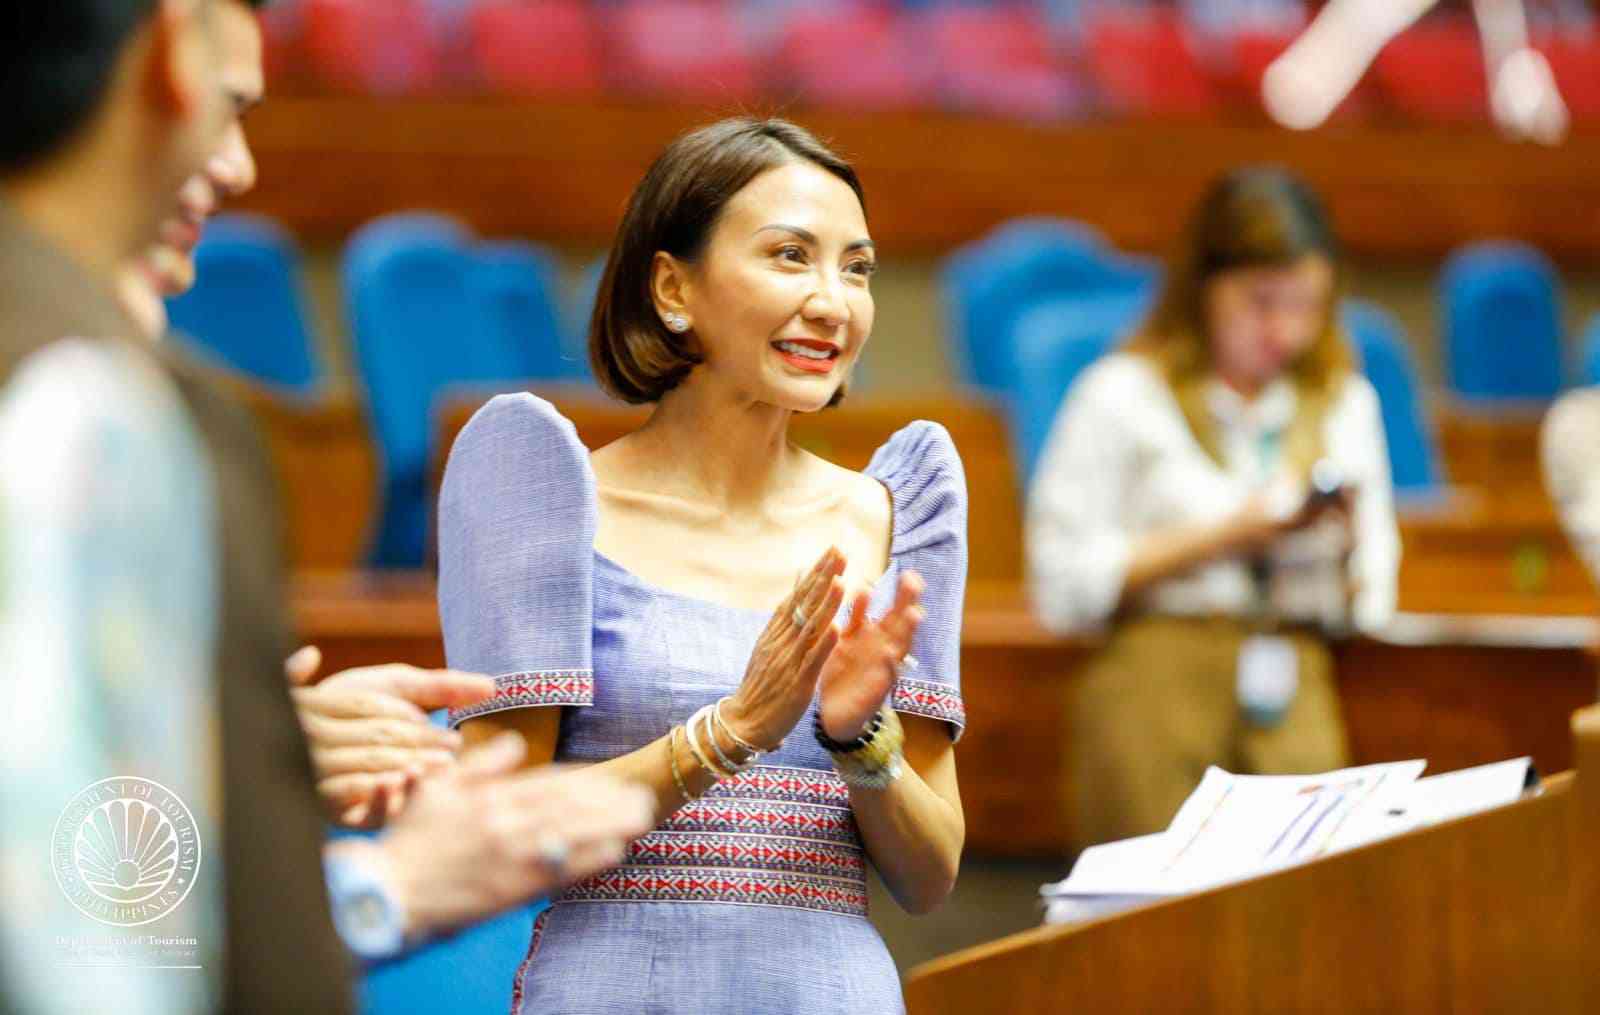 DOT extends gratitude to lawmakers for swift approval of PHP 2.7 billion increase in budget